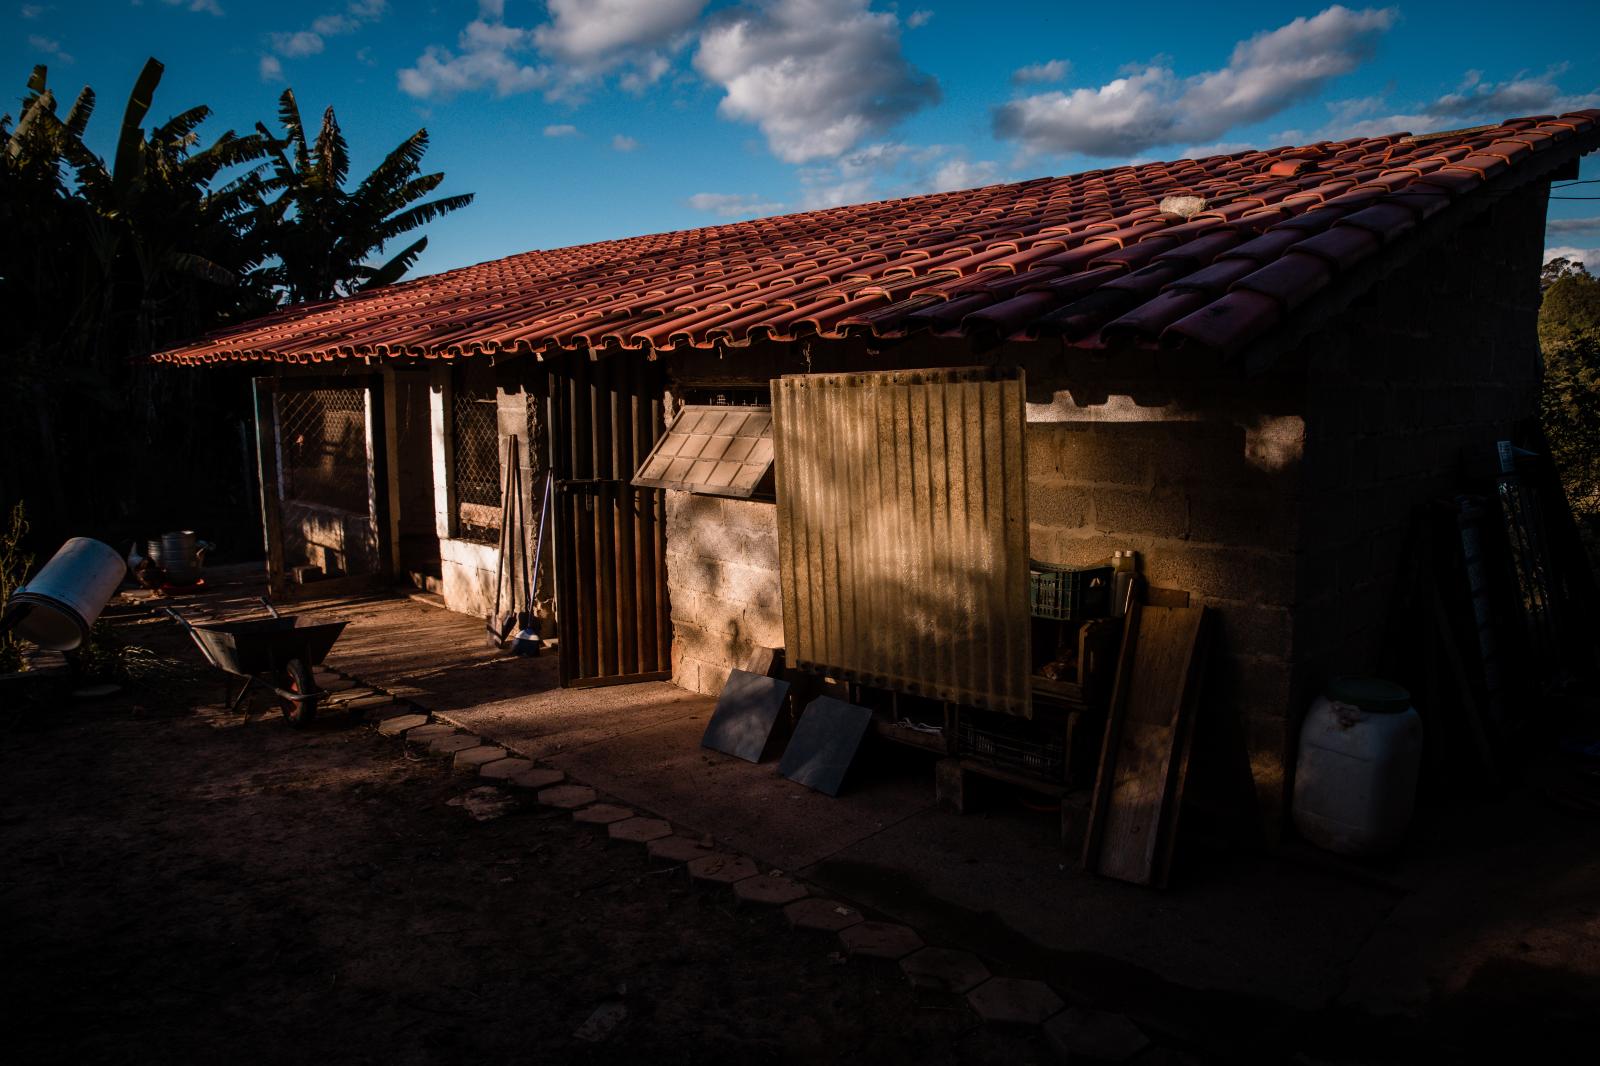 Life of a chicken farm during the Covid-19 pandemic in Brazil | Buy this image